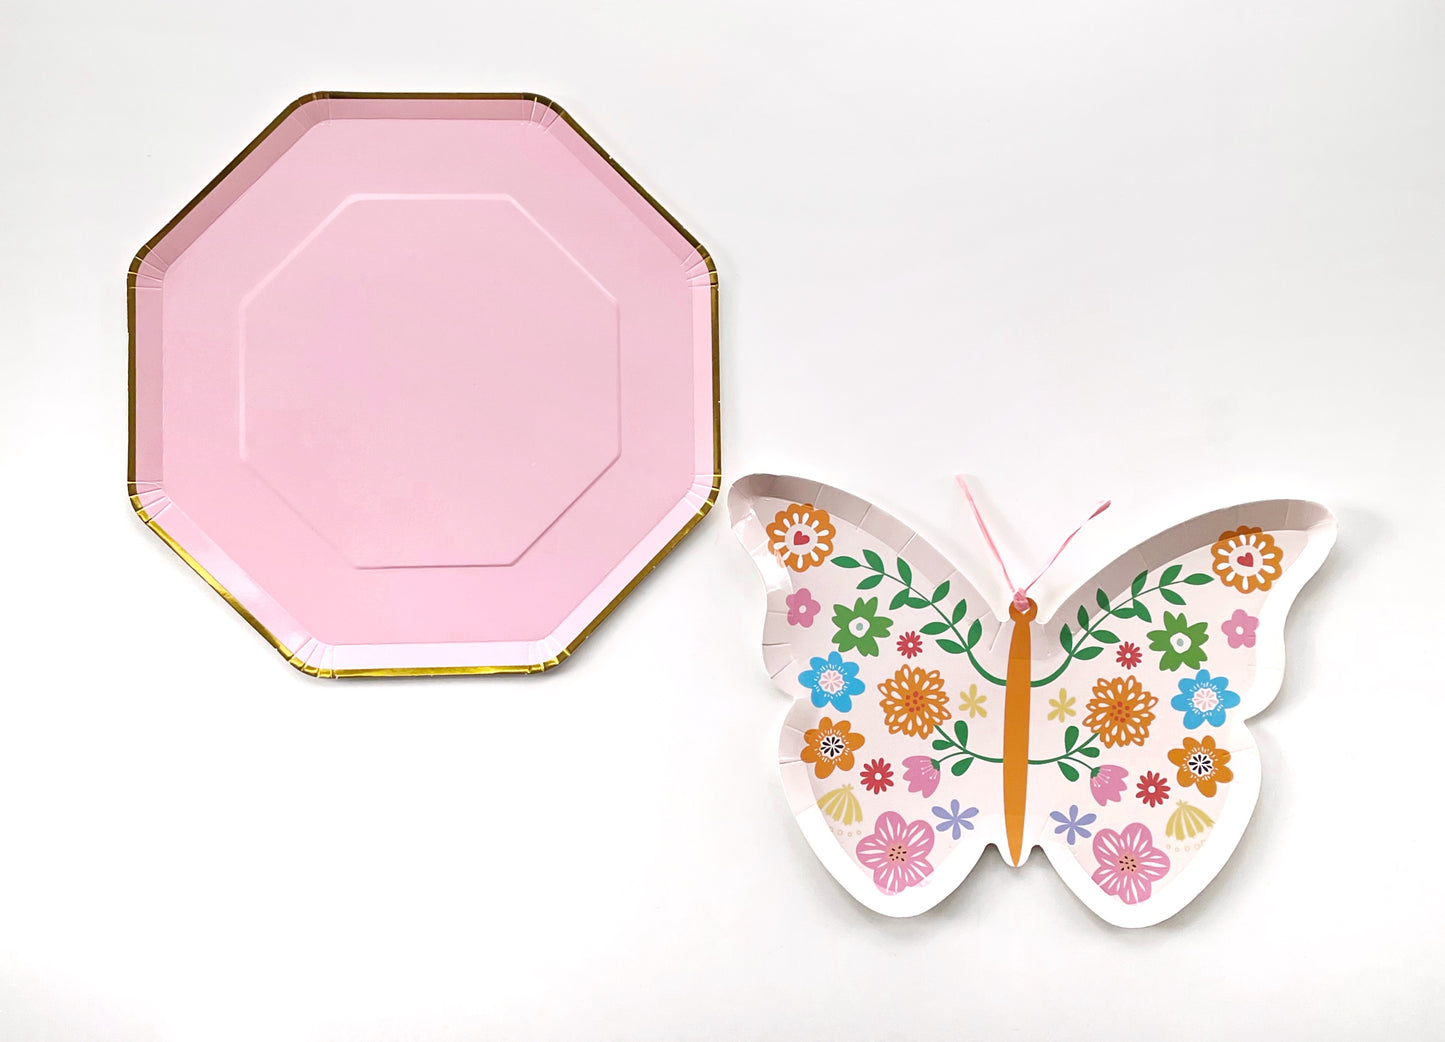 A large pink and gold paper party plate and a small butterfly shaped paper party plate. The Butterfly pattern includes pink, gold, blue, green and orange colours. The large party plates are in the shape of an octagon.